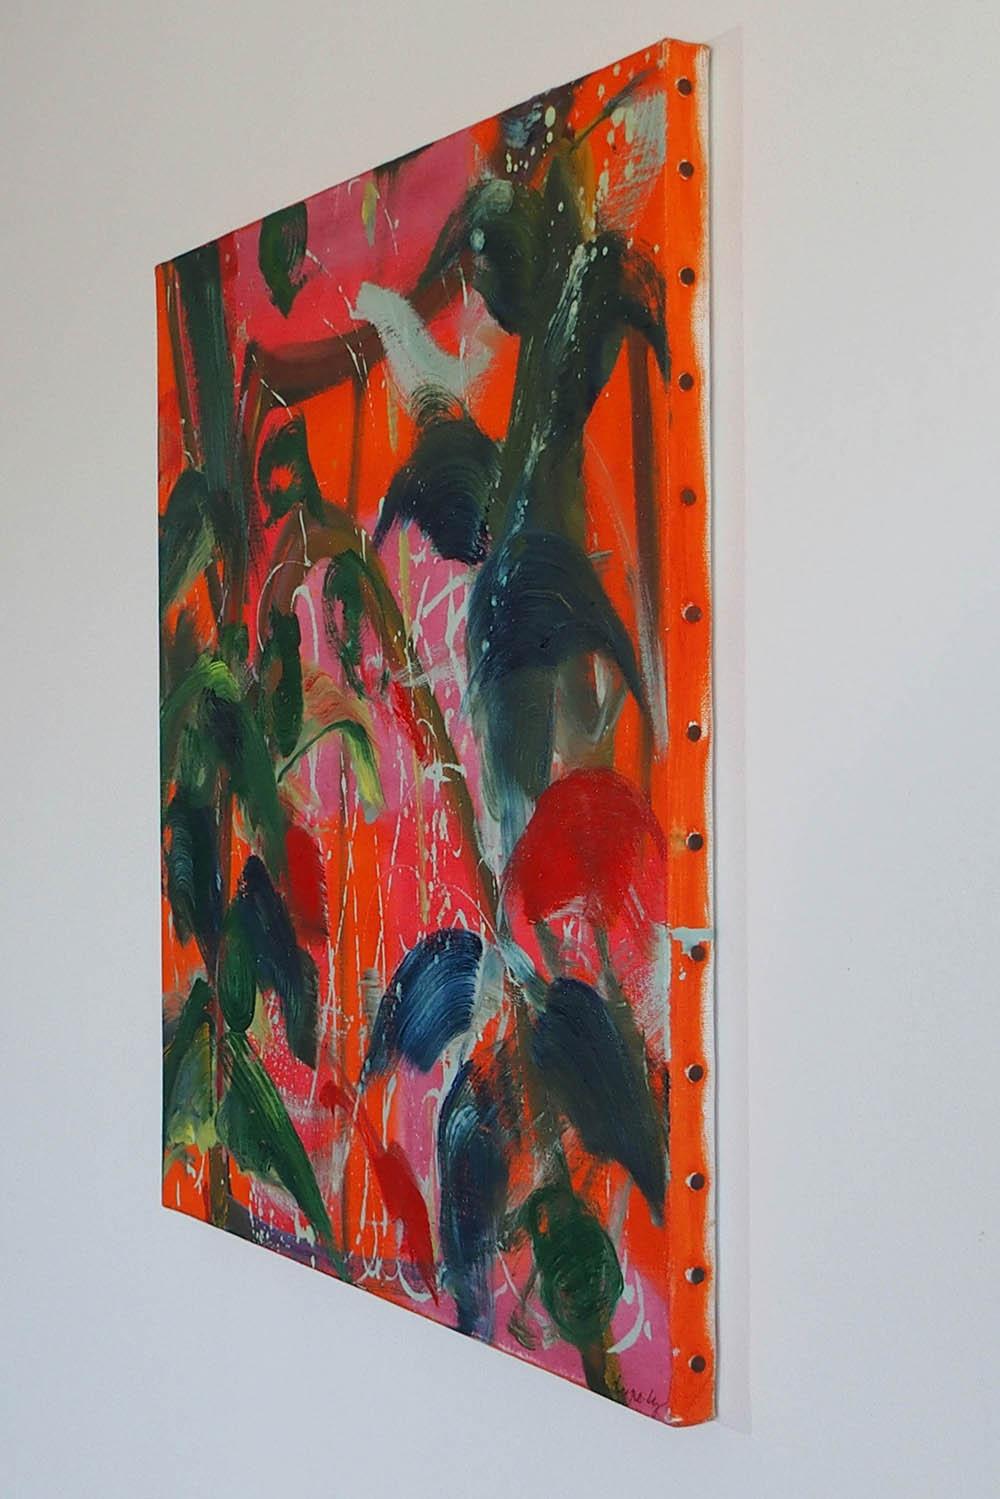 Saïgon by Christophe Dupety - Contemporary painting, Flora, Bright colors 2